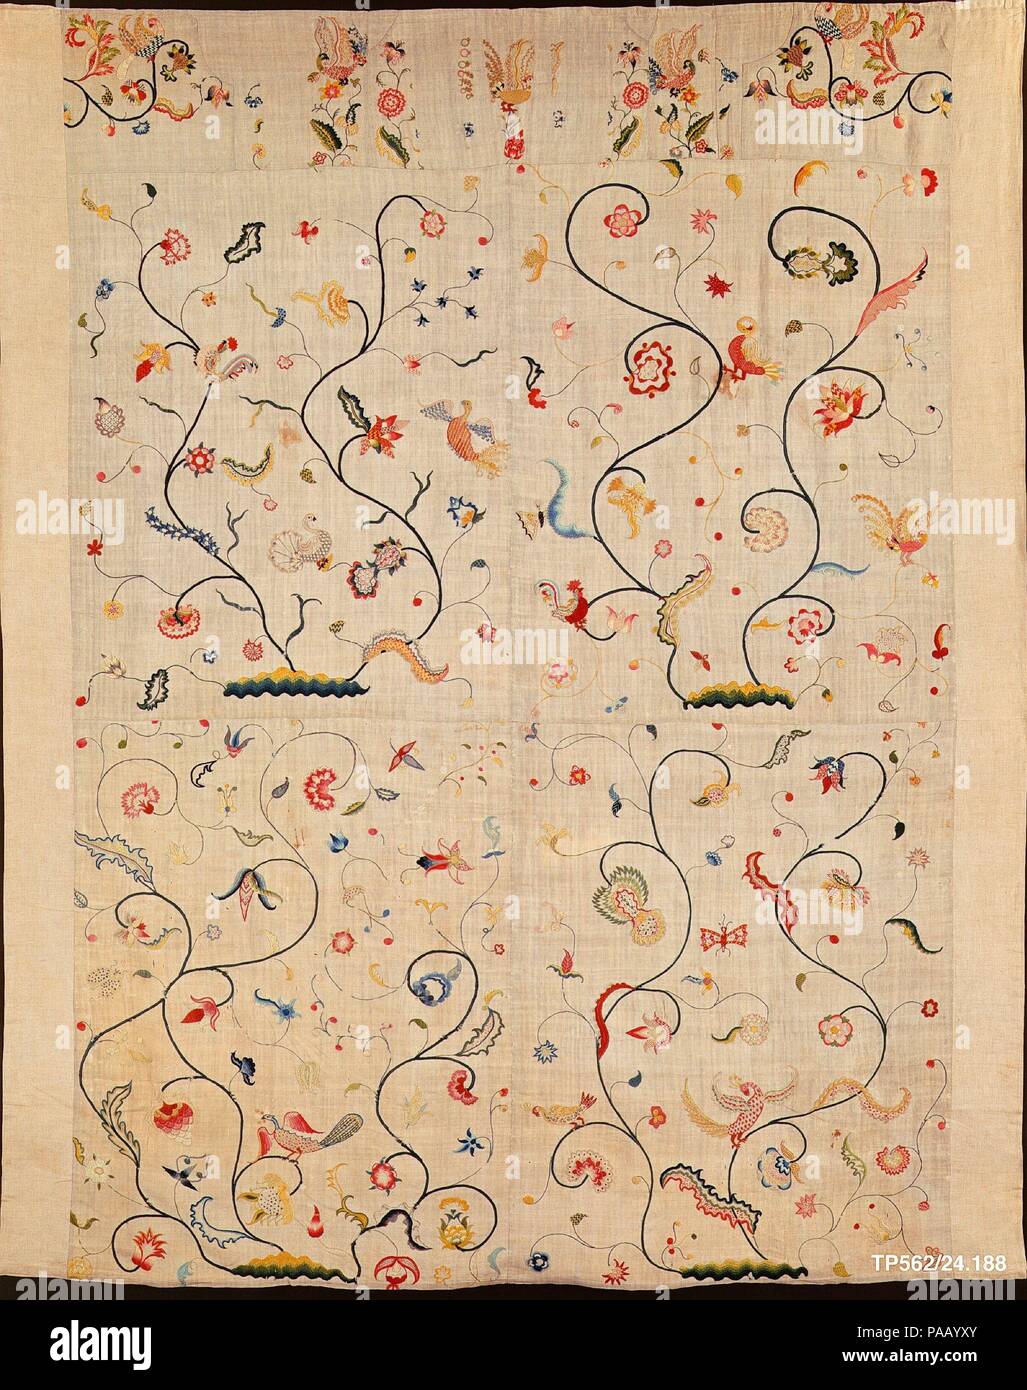 Embroidered coverlet. Culture: American or British. Dimensions: 83 1/2 x 69 1/2 in. (212.1 x 176.5 cm). Date: ca. 1720.  This linen coverlet is embroidered with multicolored wools in satin stitch, long and short stitch, buttonhole stitch, stem stitch, and a variety of filling stitches. It is composed of four panels, each about 371/430 inches, with a band of twelve small pieces stitched together along the top. Each large panel is embroidered with flowering trees of life, upon which birds are perched. The piece is backed and bordered by new, machine-stitched linen. Museum: Metropolitan Museum of Stock Photo